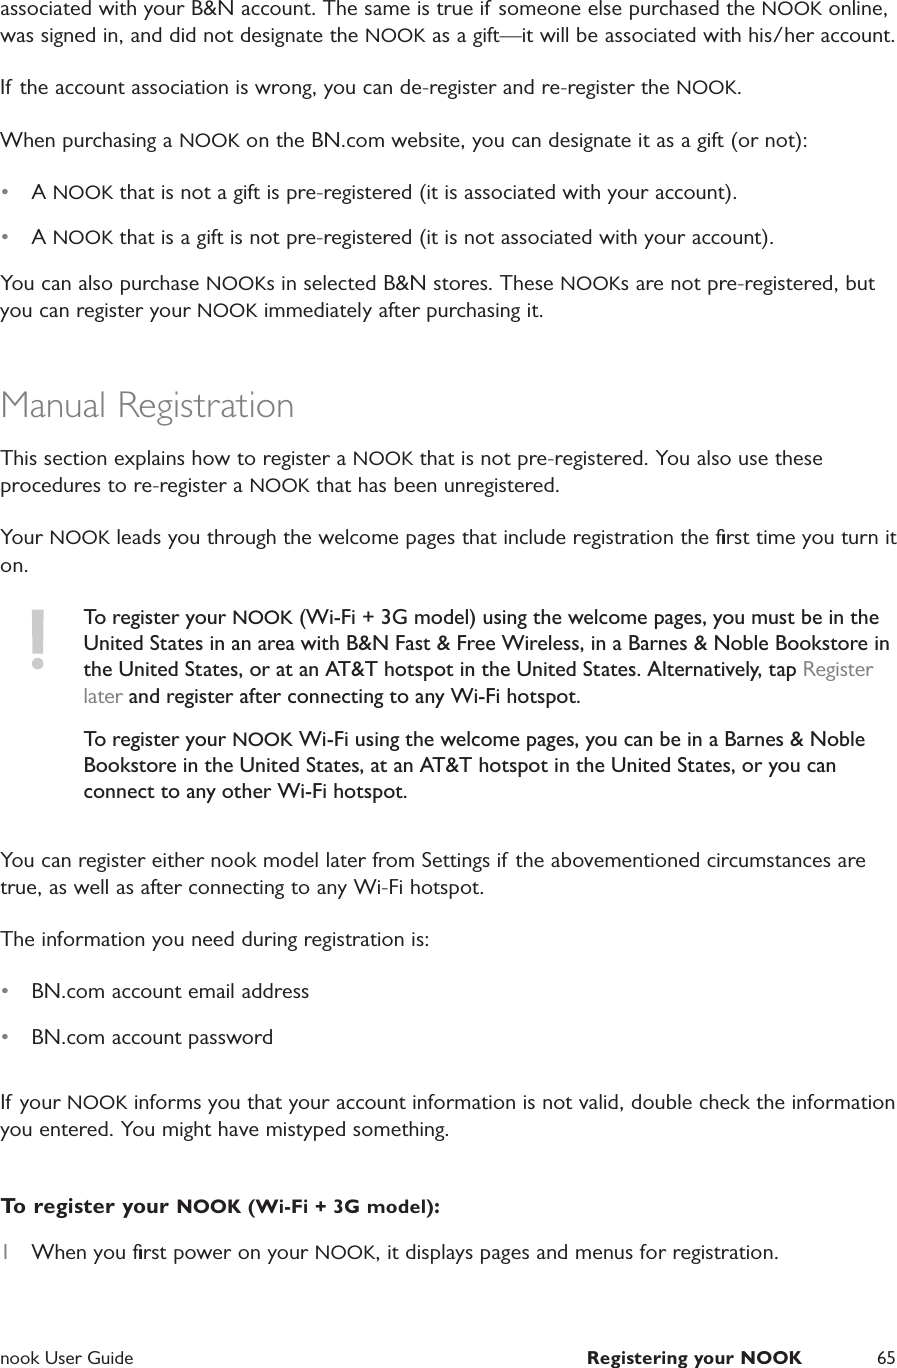  nook User Guide  Registering your NOOK 65associated with your B&amp;N account. The same is true if someone else purchased the NOOK online, was signed in, and did not designate the NOOK as a gift—it will be associated with his/her account.If the account association is wrong, you can de-register and re-register the NOOK.When purchasing a NOOK on the BN.com website, you can designate it as a gift (or not): •  A NOOK that is not a gift is pre-registered (it is associated with your account). •  A NOOK that is a gift is not pre-registered (it is not associated with your account). You can also purchase NOOKs in selected B&amp;N stores. These NOOKs are not pre-registered, but you can register your NOOK immediately after purchasing it.Manual RegistrationThis section explains how to register a NOOK that is not pre-registered. You also use these procedures to re-register a NOOK that has been unregistered.Your NOOK leads you through the welcome pages that include registration the ﬁrst time you turn it on.To register your NOOK (Wi-Fi + 3G model) using the welcome pages, you must be in the United States in an area with B&amp;N Fast &amp; Free Wireless, in a Barnes &amp; Noble Bookstore in the United States, or at an AT&amp;T hotspot in the United States. Alternatively, tap Register later and register after connecting to any Wi-Fi hotspot.To register your NOOK Wi-Fi using the welcome pages, you can be in a Barnes &amp; Noble Bookstore in the United States, at an AT&amp;T hotspot in the United States, or you can connect to any other Wi-Fi hotspot.You can register either nook model later from Settings if the abovementioned circumstances are true, as well as after connecting to any Wi-Fi hotspot.The information you need during registration is:•  BN.com account email address•  BN.com account passwordIf your NOOK informs you that your account information is not valid, double check the information you entered. You might have mistyped something.To register your NOOK (Wi-Fi + 3G model):1  When you ﬁrst power on your NOOK, it displays pages and menus for registration.